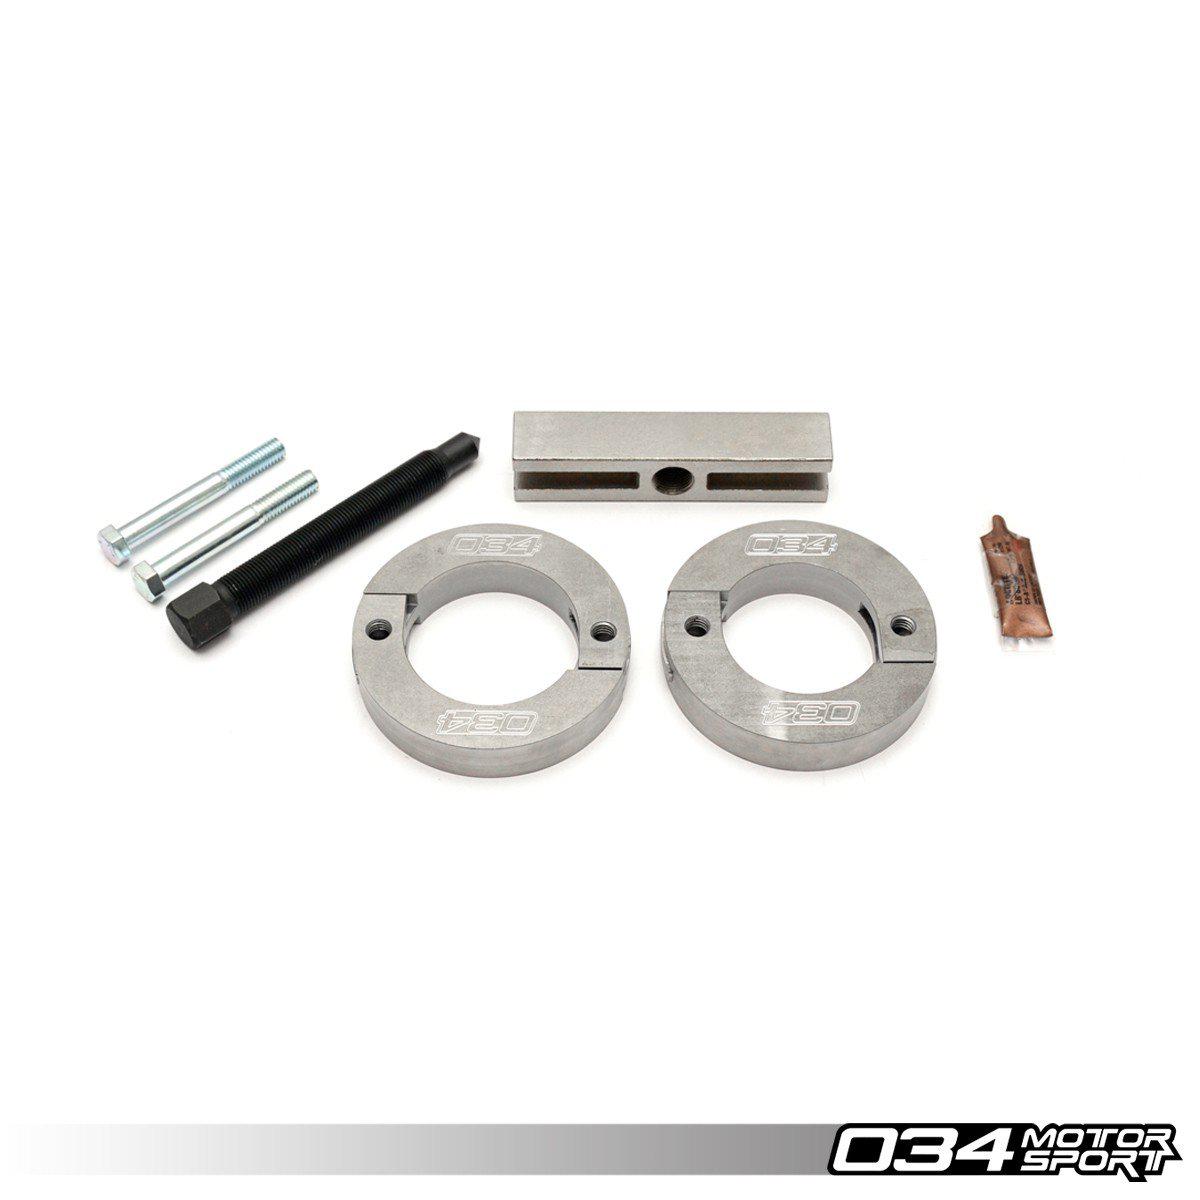 034Motorsport 3.0 TFSI Supercharger Pulley Removal Tool, B8/B8.5 Audi S4/S5/Q5/SQ5 &amp; C7/C7.5 Audi A6/A7-A Little Tuning Co